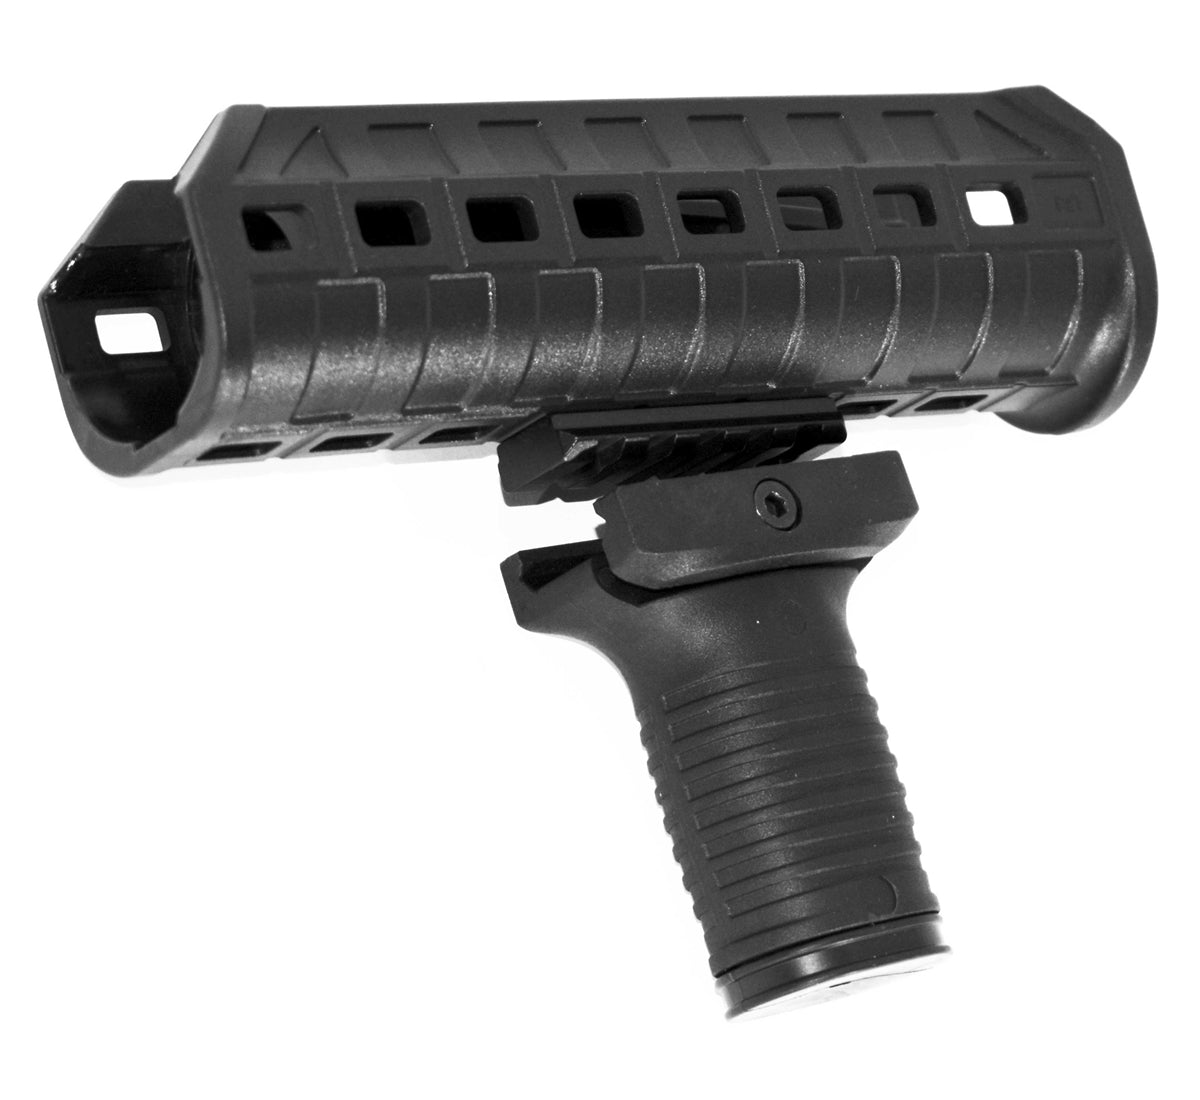 polymer forend and grip combo for remington 870 12 gauge pump.